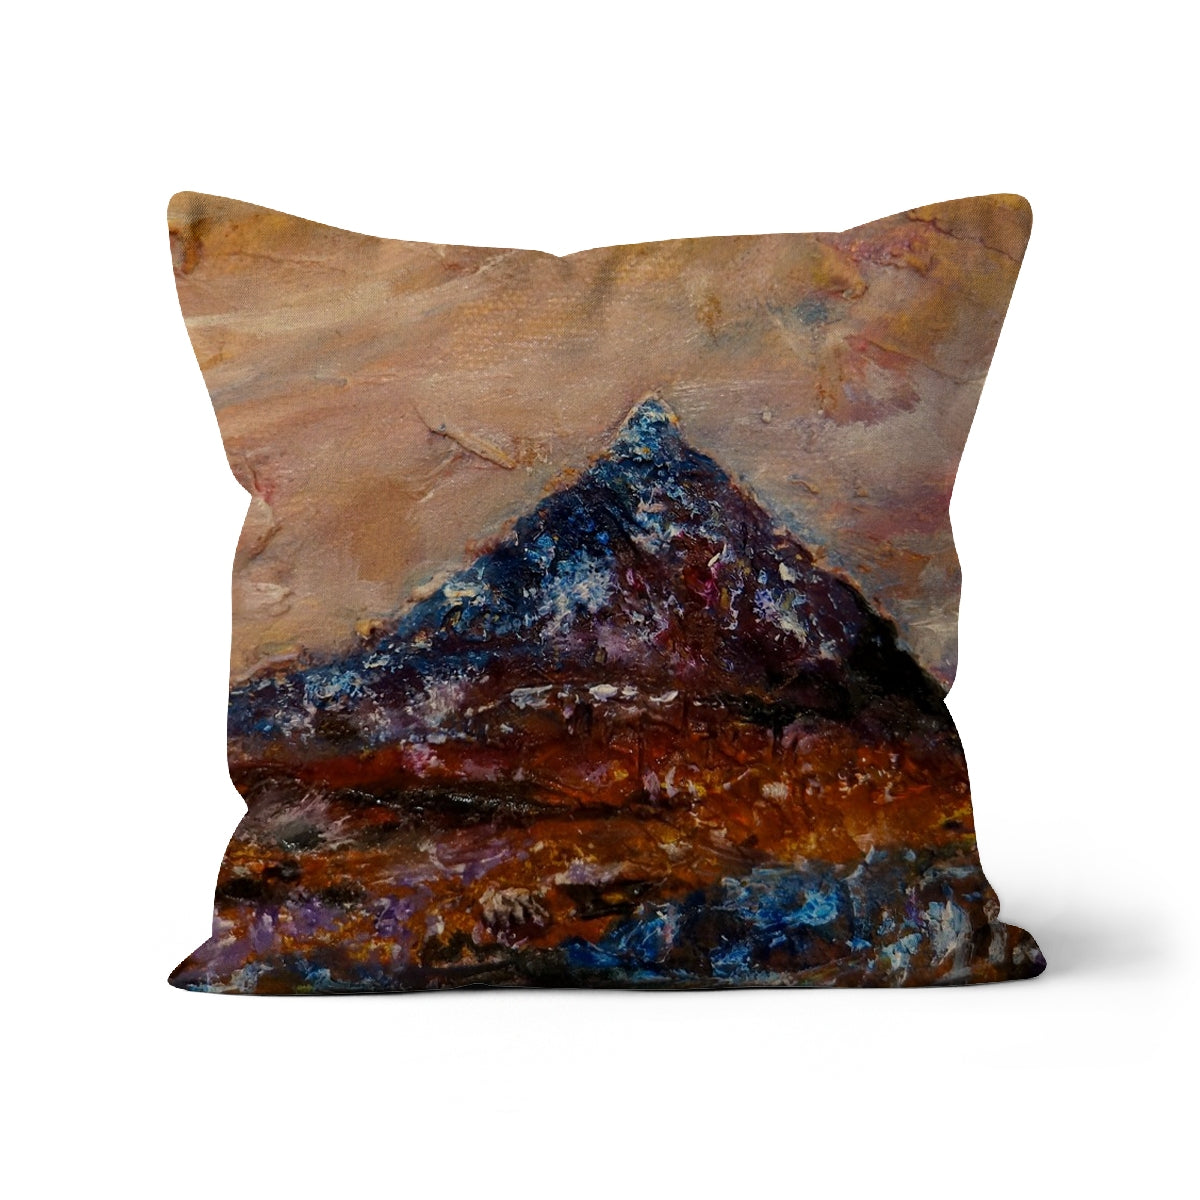 Buachaille Etive Mòr Art Gifts Cushion-Cushions-Glencoe Art Gallery-Faux Suede-22"x22"-Paintings, Prints, Homeware, Art Gifts From Scotland By Scottish Artist Kevin Hunter